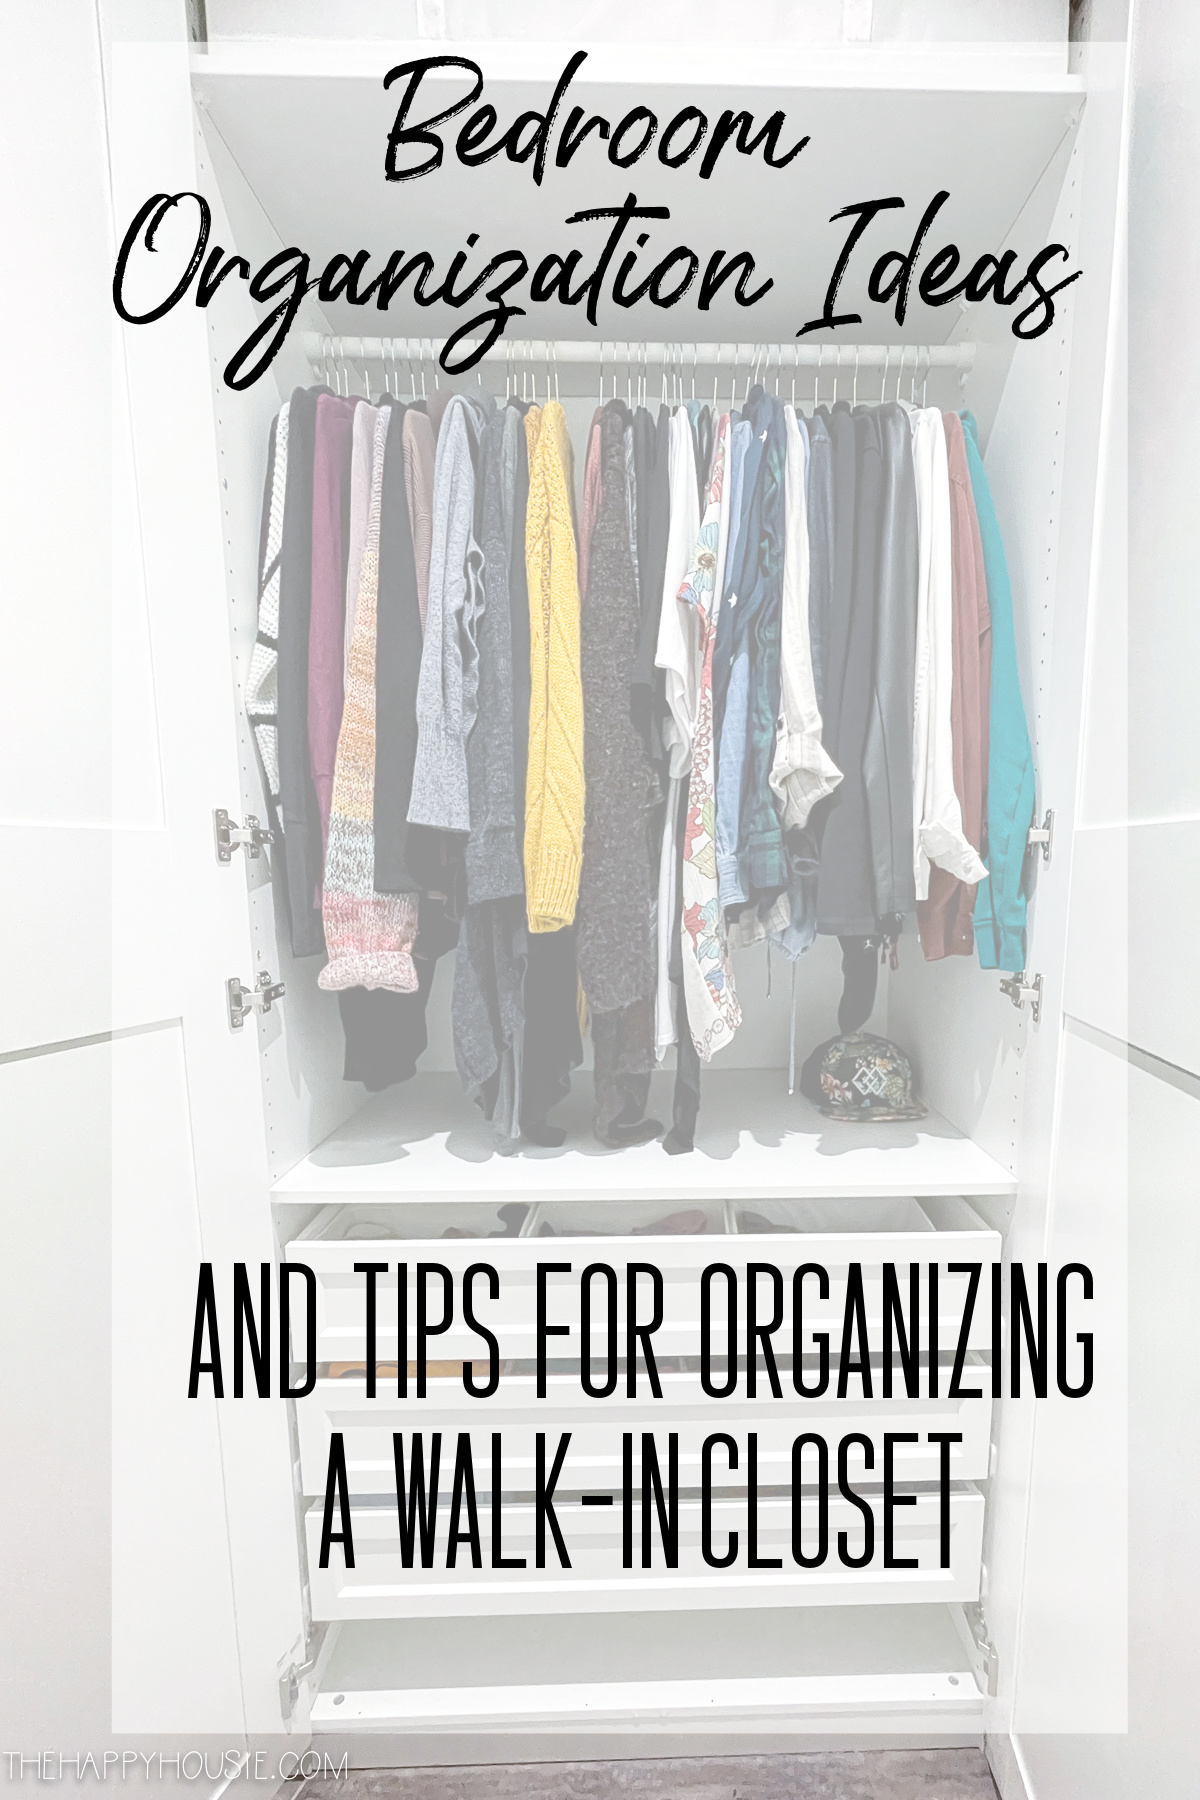 https://www.thehappyhousie.com/wp-content/uploads/2022/02/bedroom-organization-ideas-and-tips-for-organizing-a-walk-in-closet.jpg